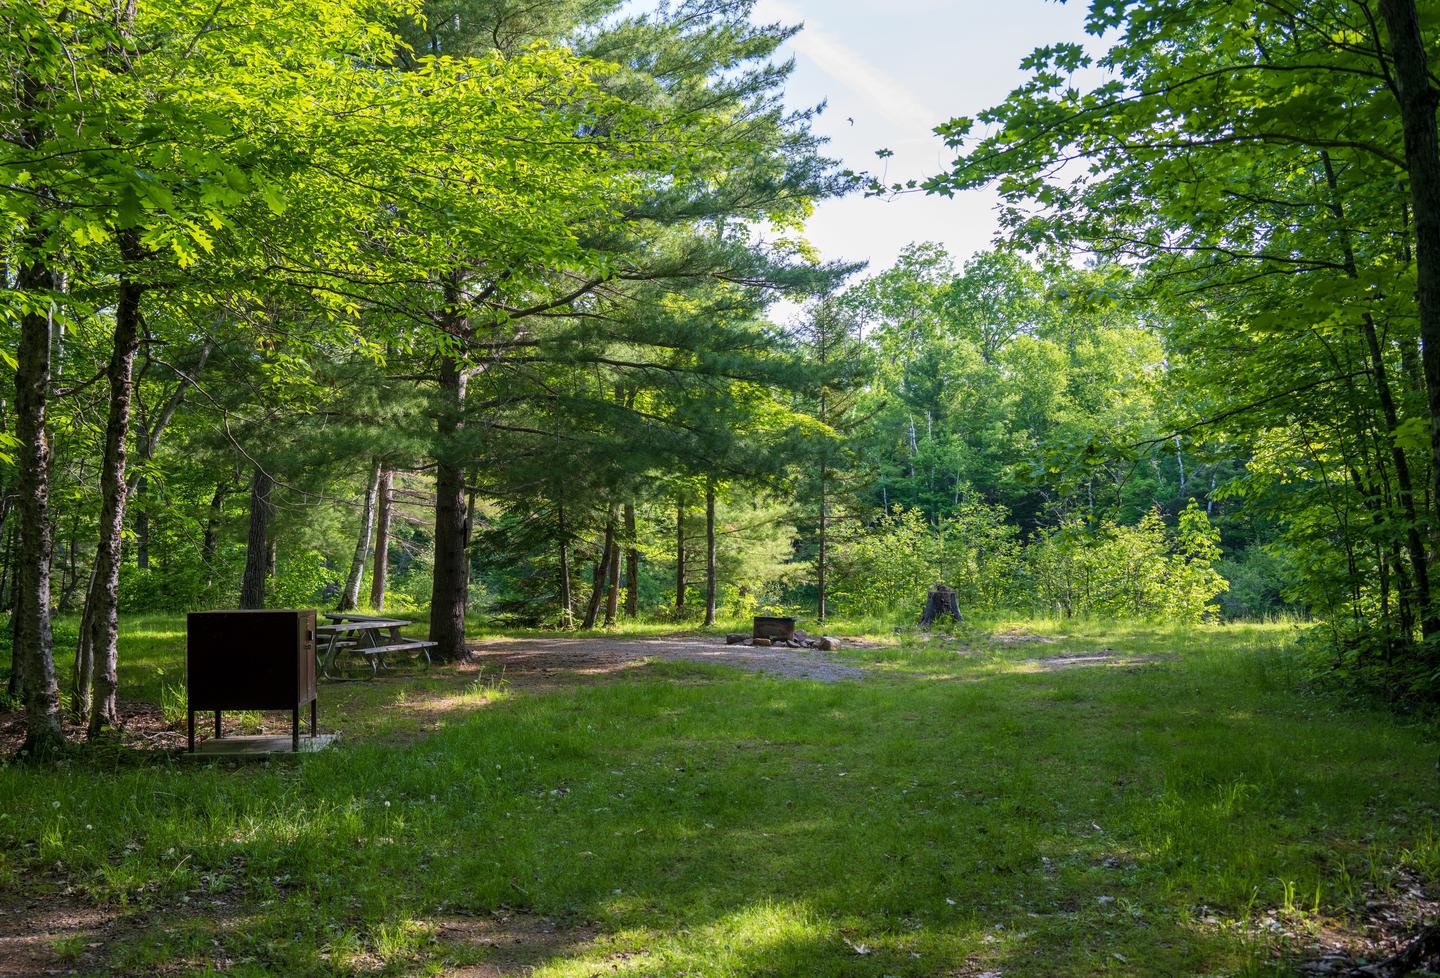 A brown metal food storage locker is near the entrance to the campsite. Two wooden picnic tables are available behind the food locker. A metal fire ring is to the right of the campsite, closer to the river.Upper East Branch is a large campsite. A metal food storage locker is available near the single vehicle parking space.